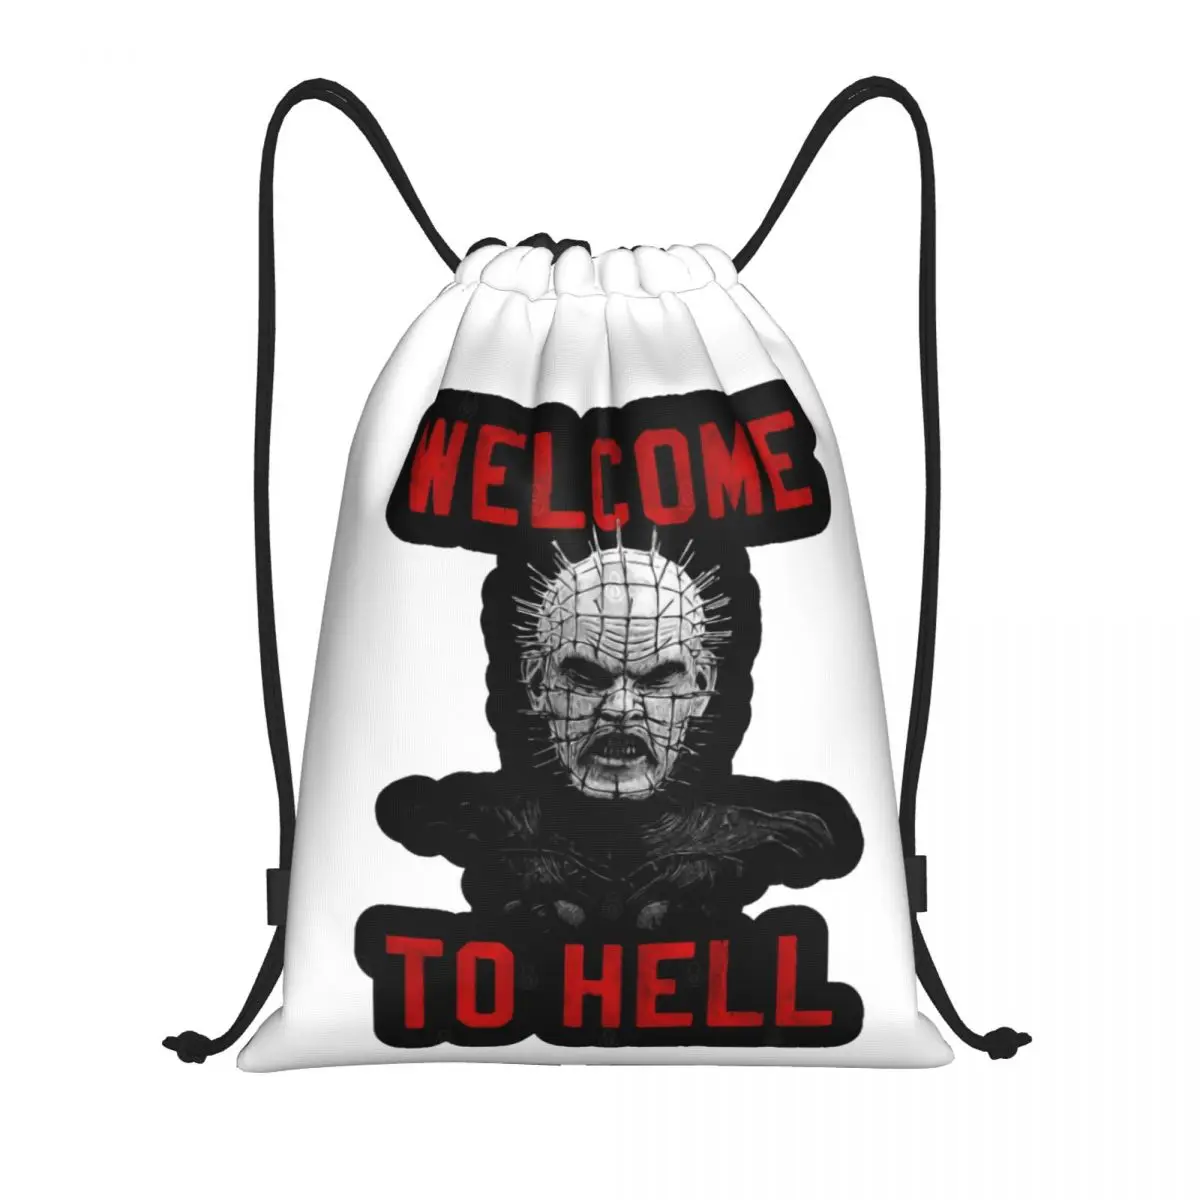 

Welcome Hell 14 Funny Graphic Drawstring Bags Gym Bag Field pack Lasting Summer camps Backpack Graphic